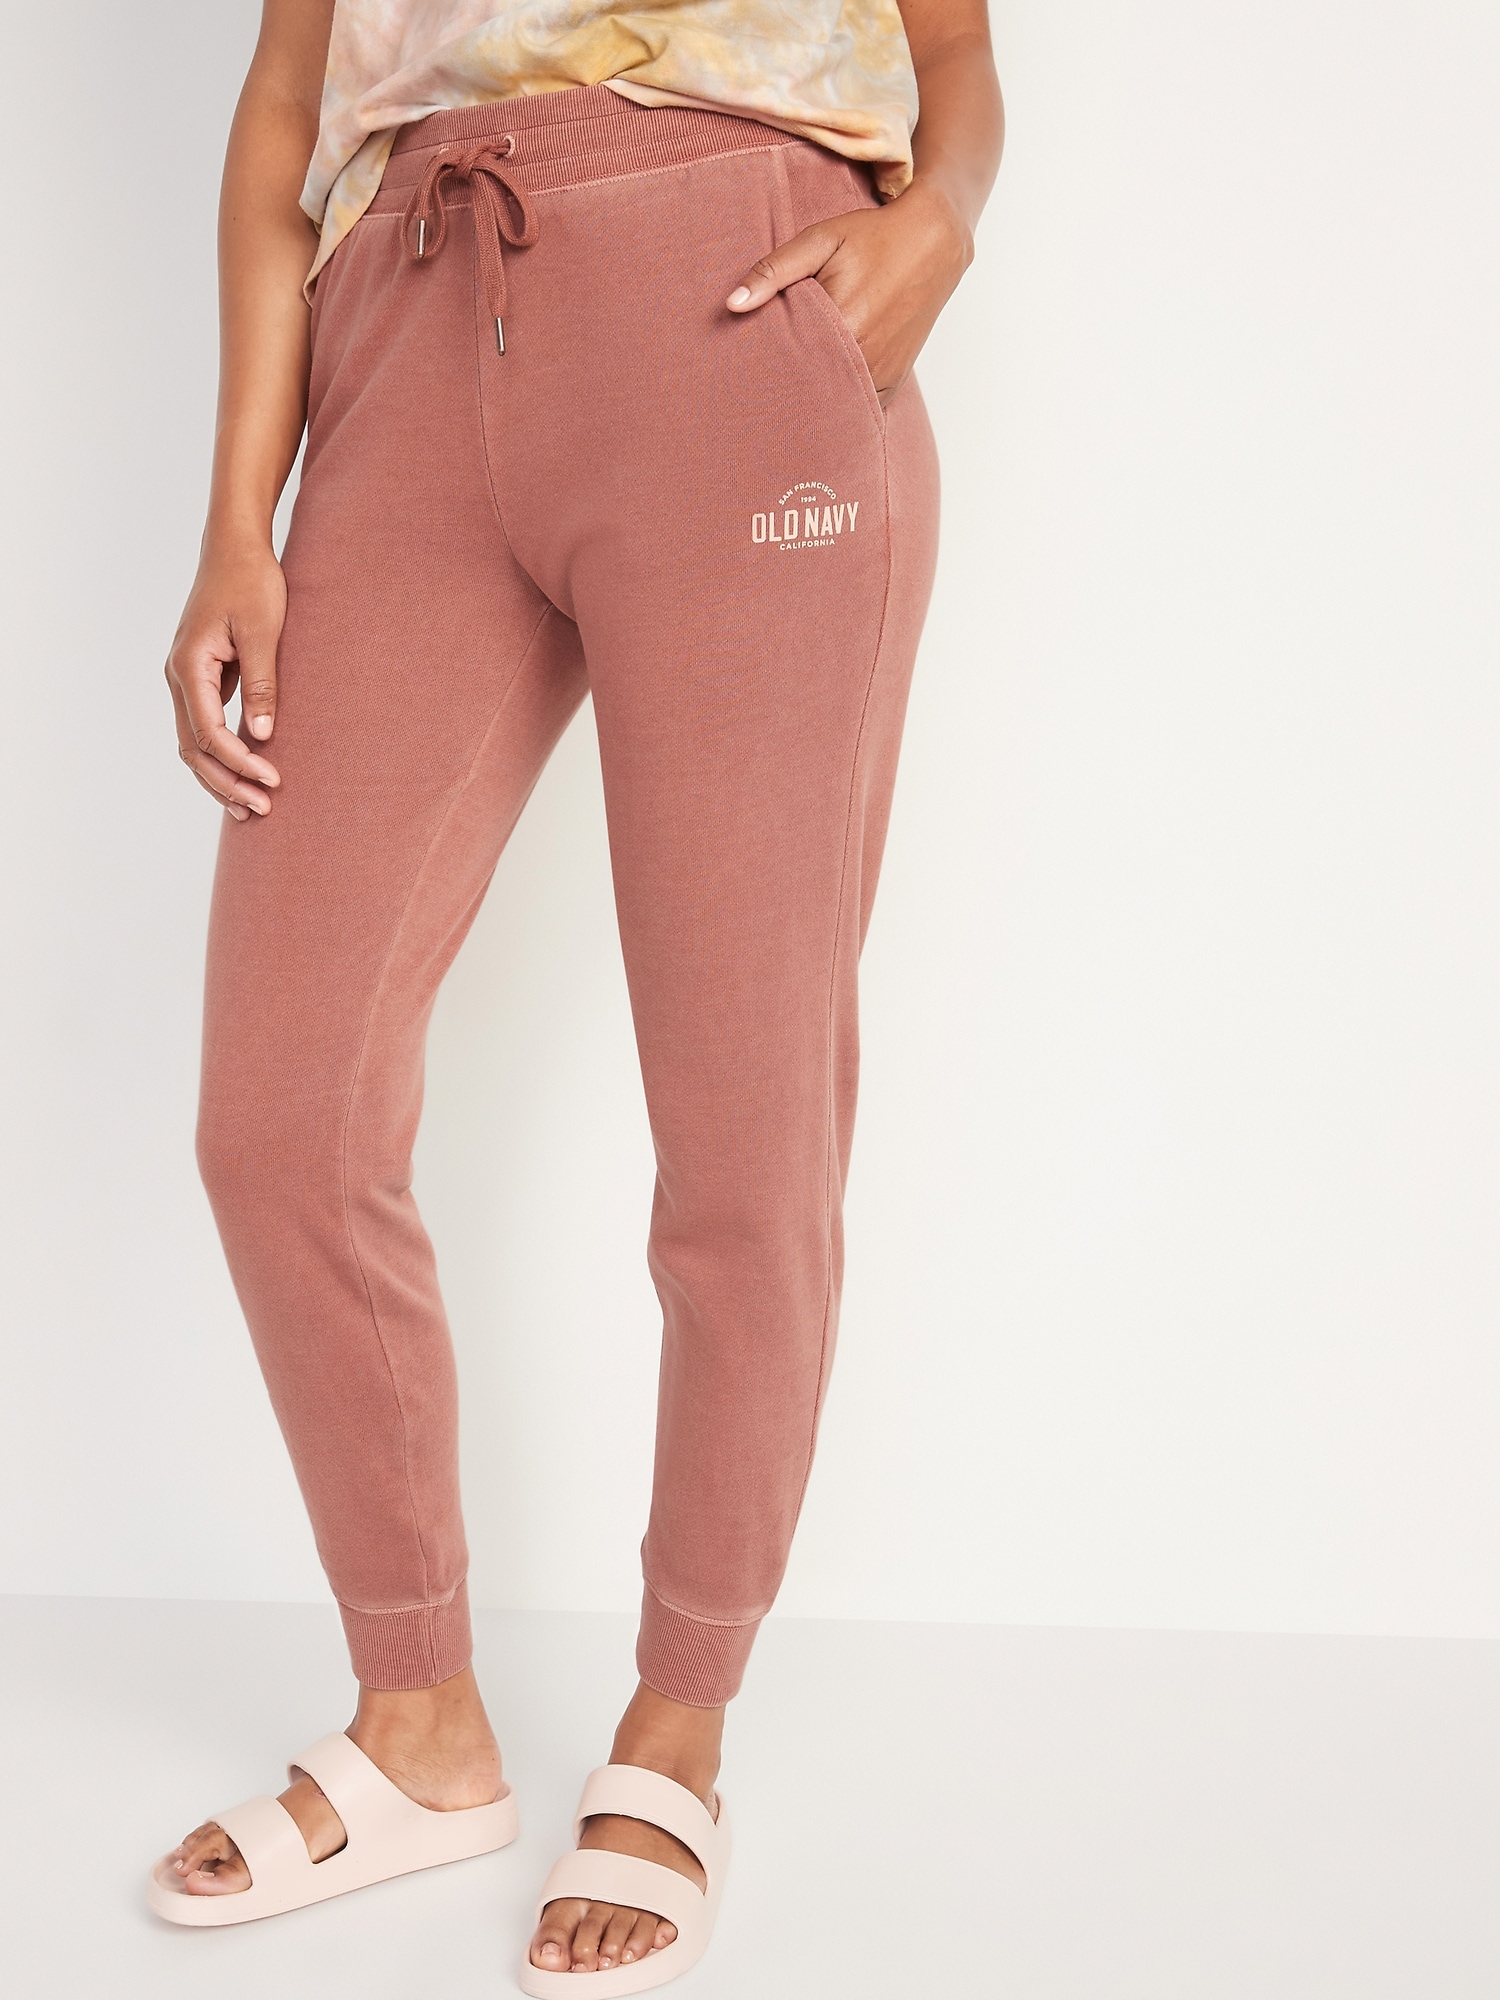 Old Navy Vintage Mid-Rise Logo-Graphic Jogger Sweatpants for Women -  ShopStyle Activewear Pants